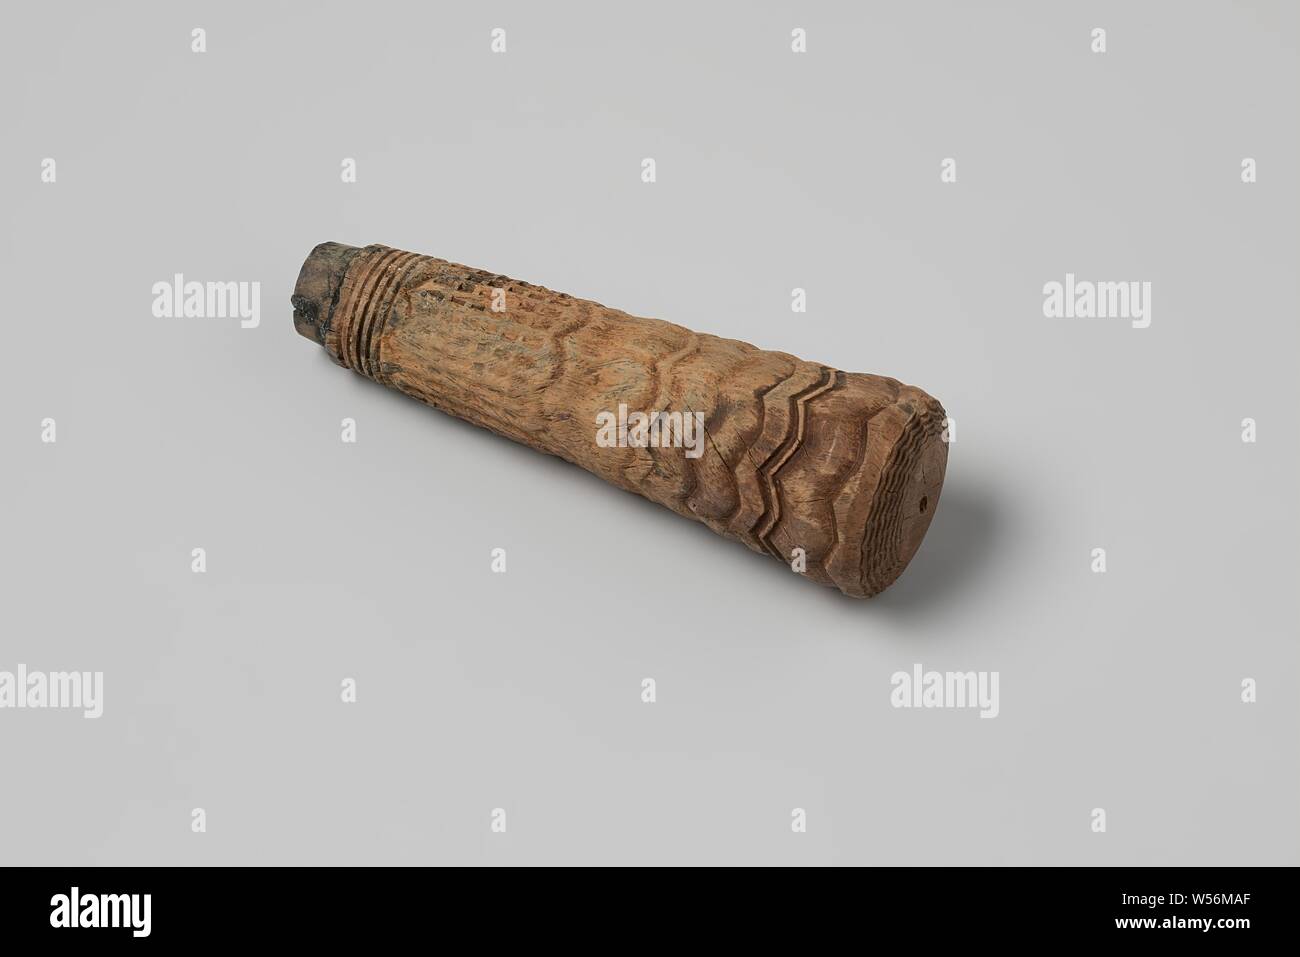 Knife lifter from the wreck of the East India dealer Hollandia, Knife, handle, cylindrical, Annet, Dutch East India Company, Hollandia (ship), anonymous, Netherlands, 1700 - in or before 13-Jul-1743, wood (plant material), h 9.3 cm × d 2.9 cm Stock Photo